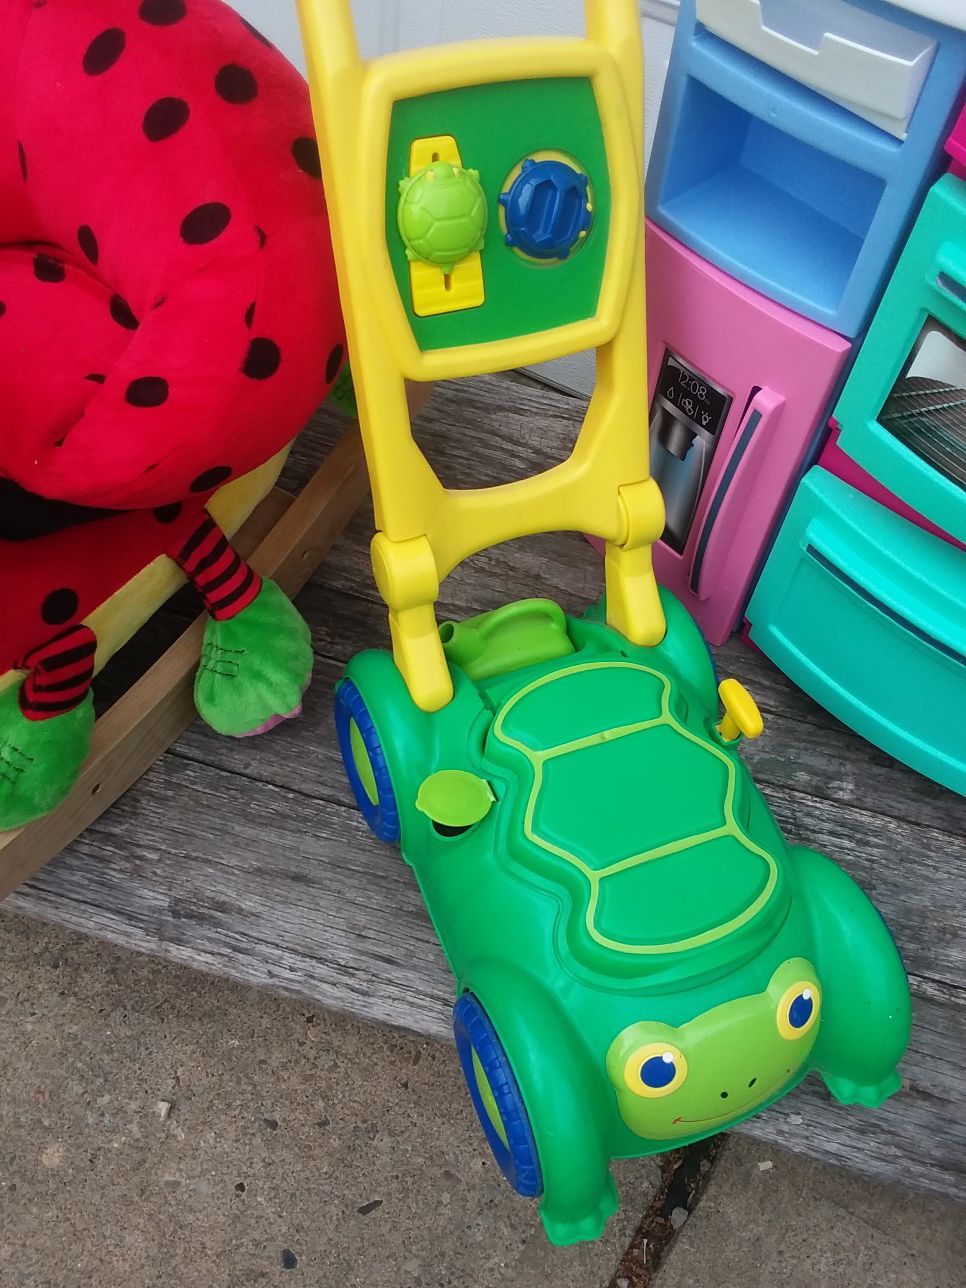 Kids toys - all $20.